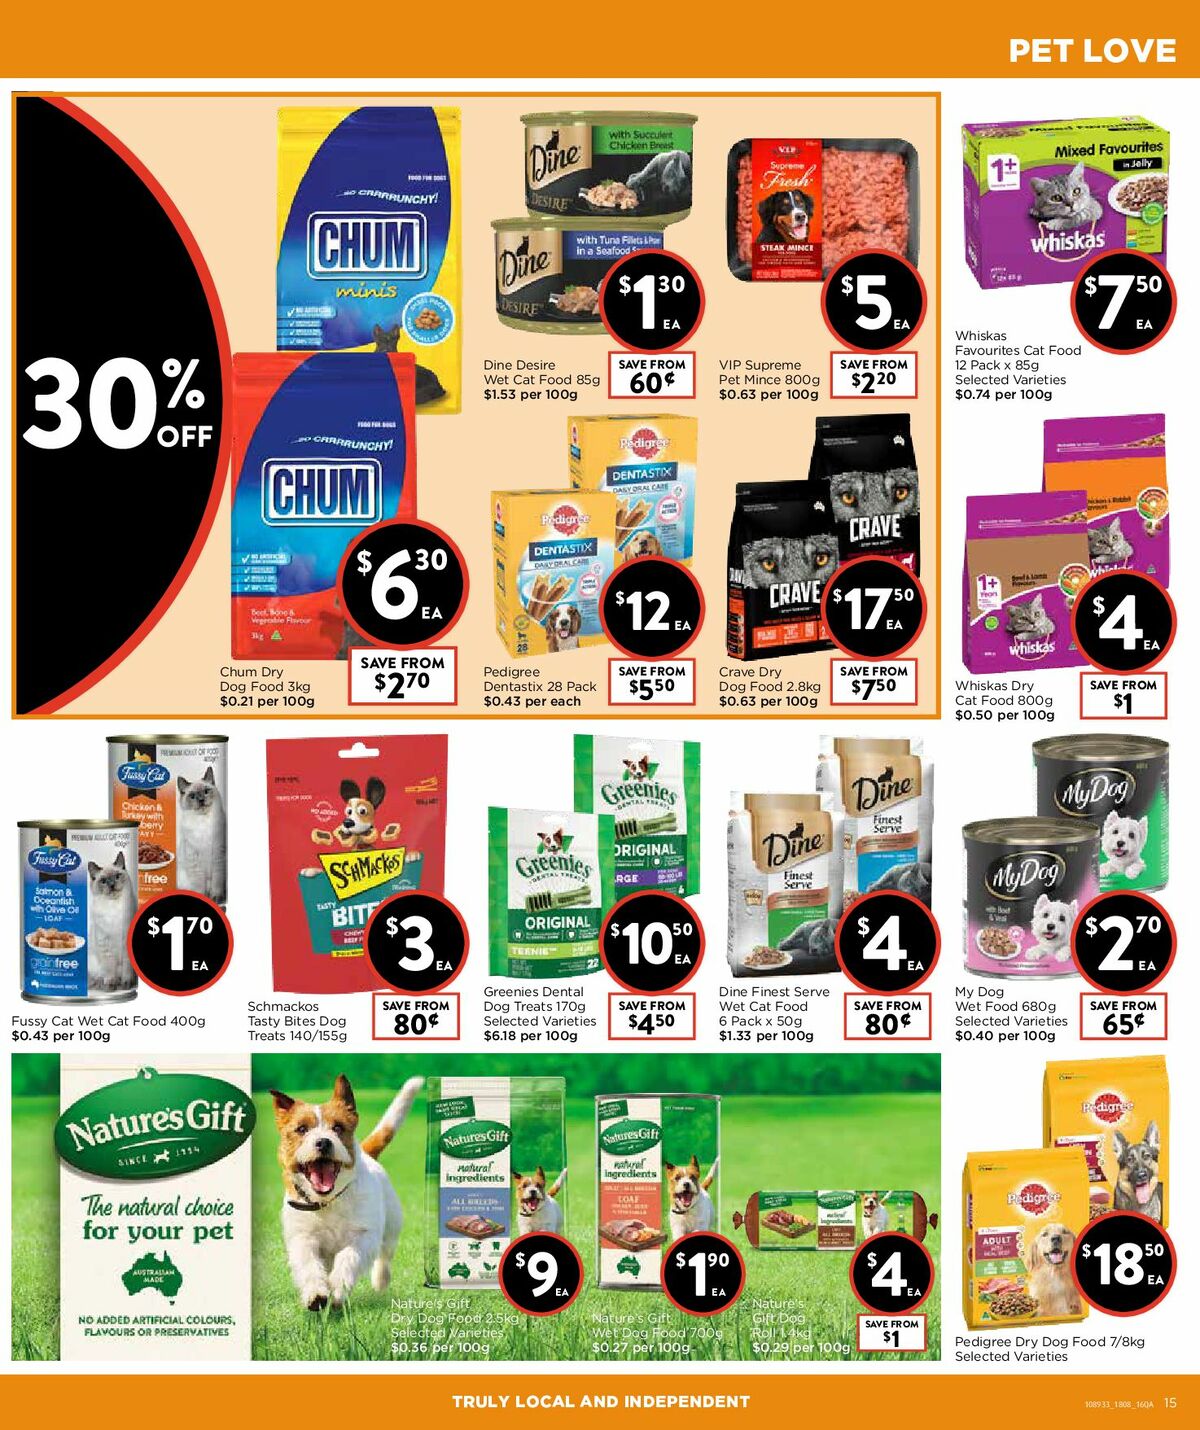 FoodWorks Supermarket Catalogues from 18 August